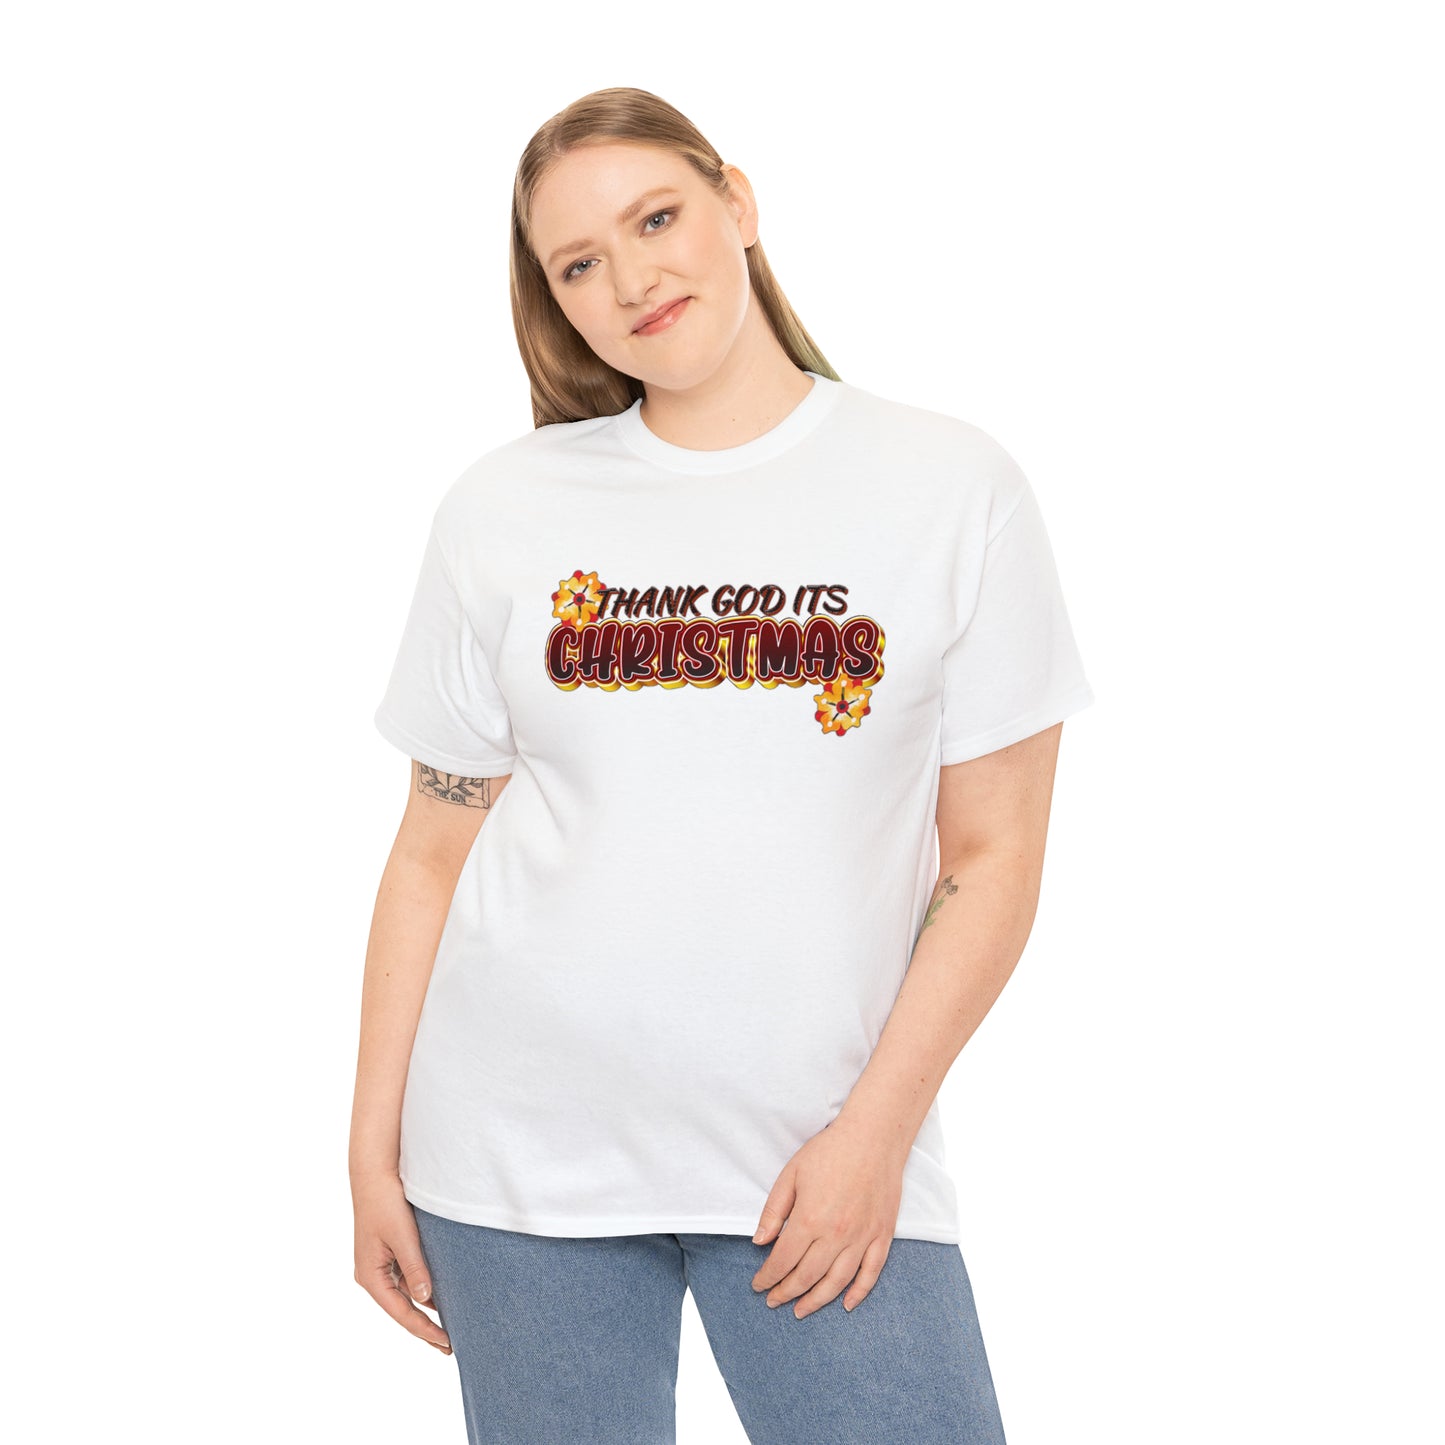 Thank God Its Christmas - Heavy Cotton Tee for Men and Women